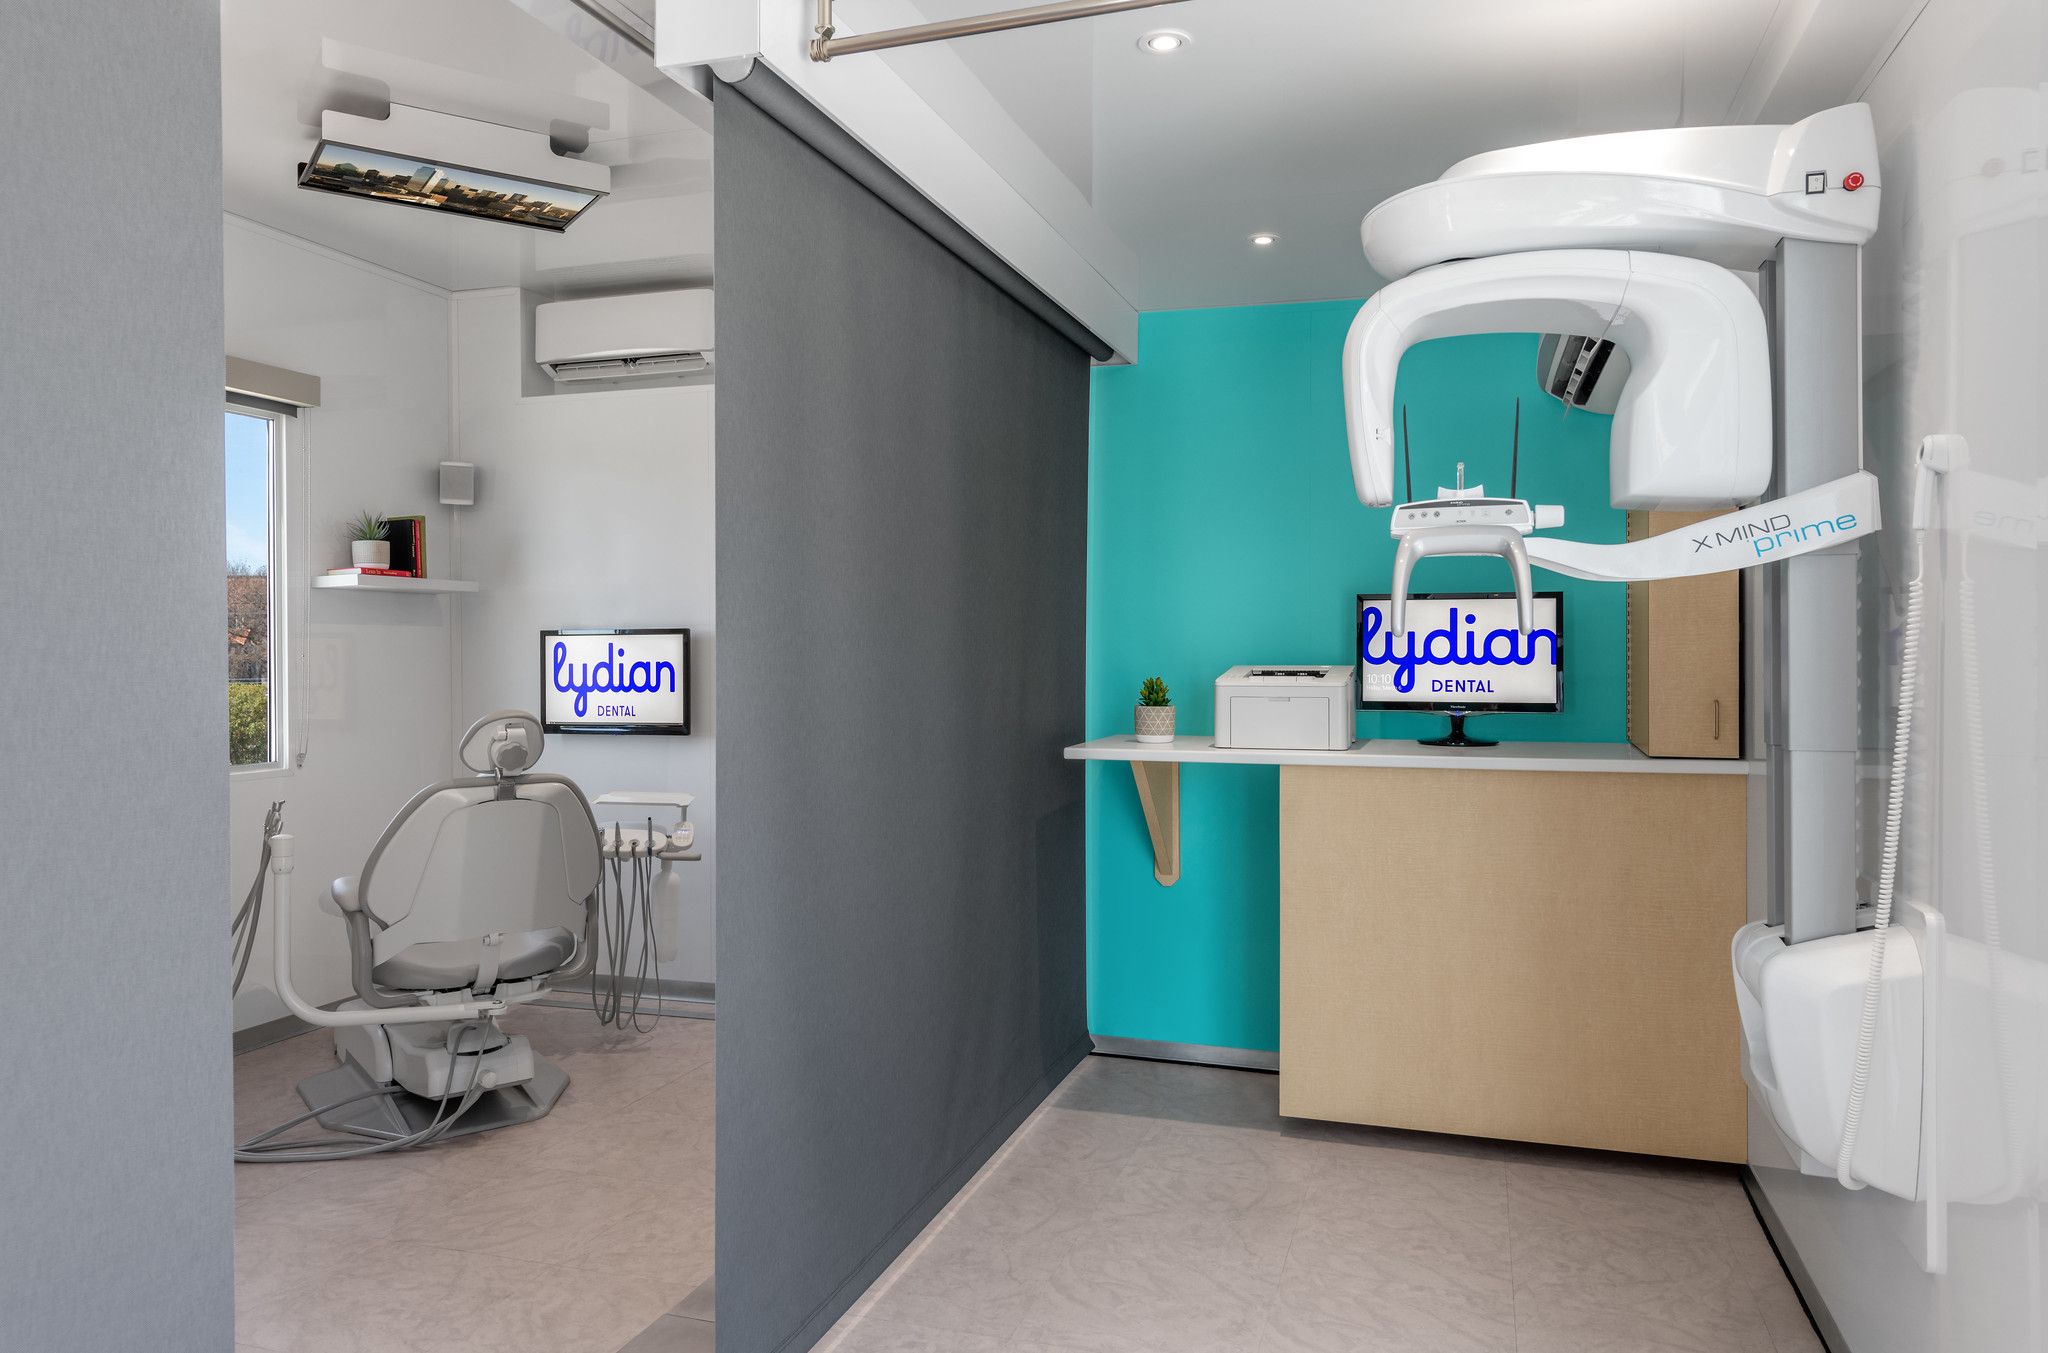 Lydian Dental Mobile Clinic Patient Room 1